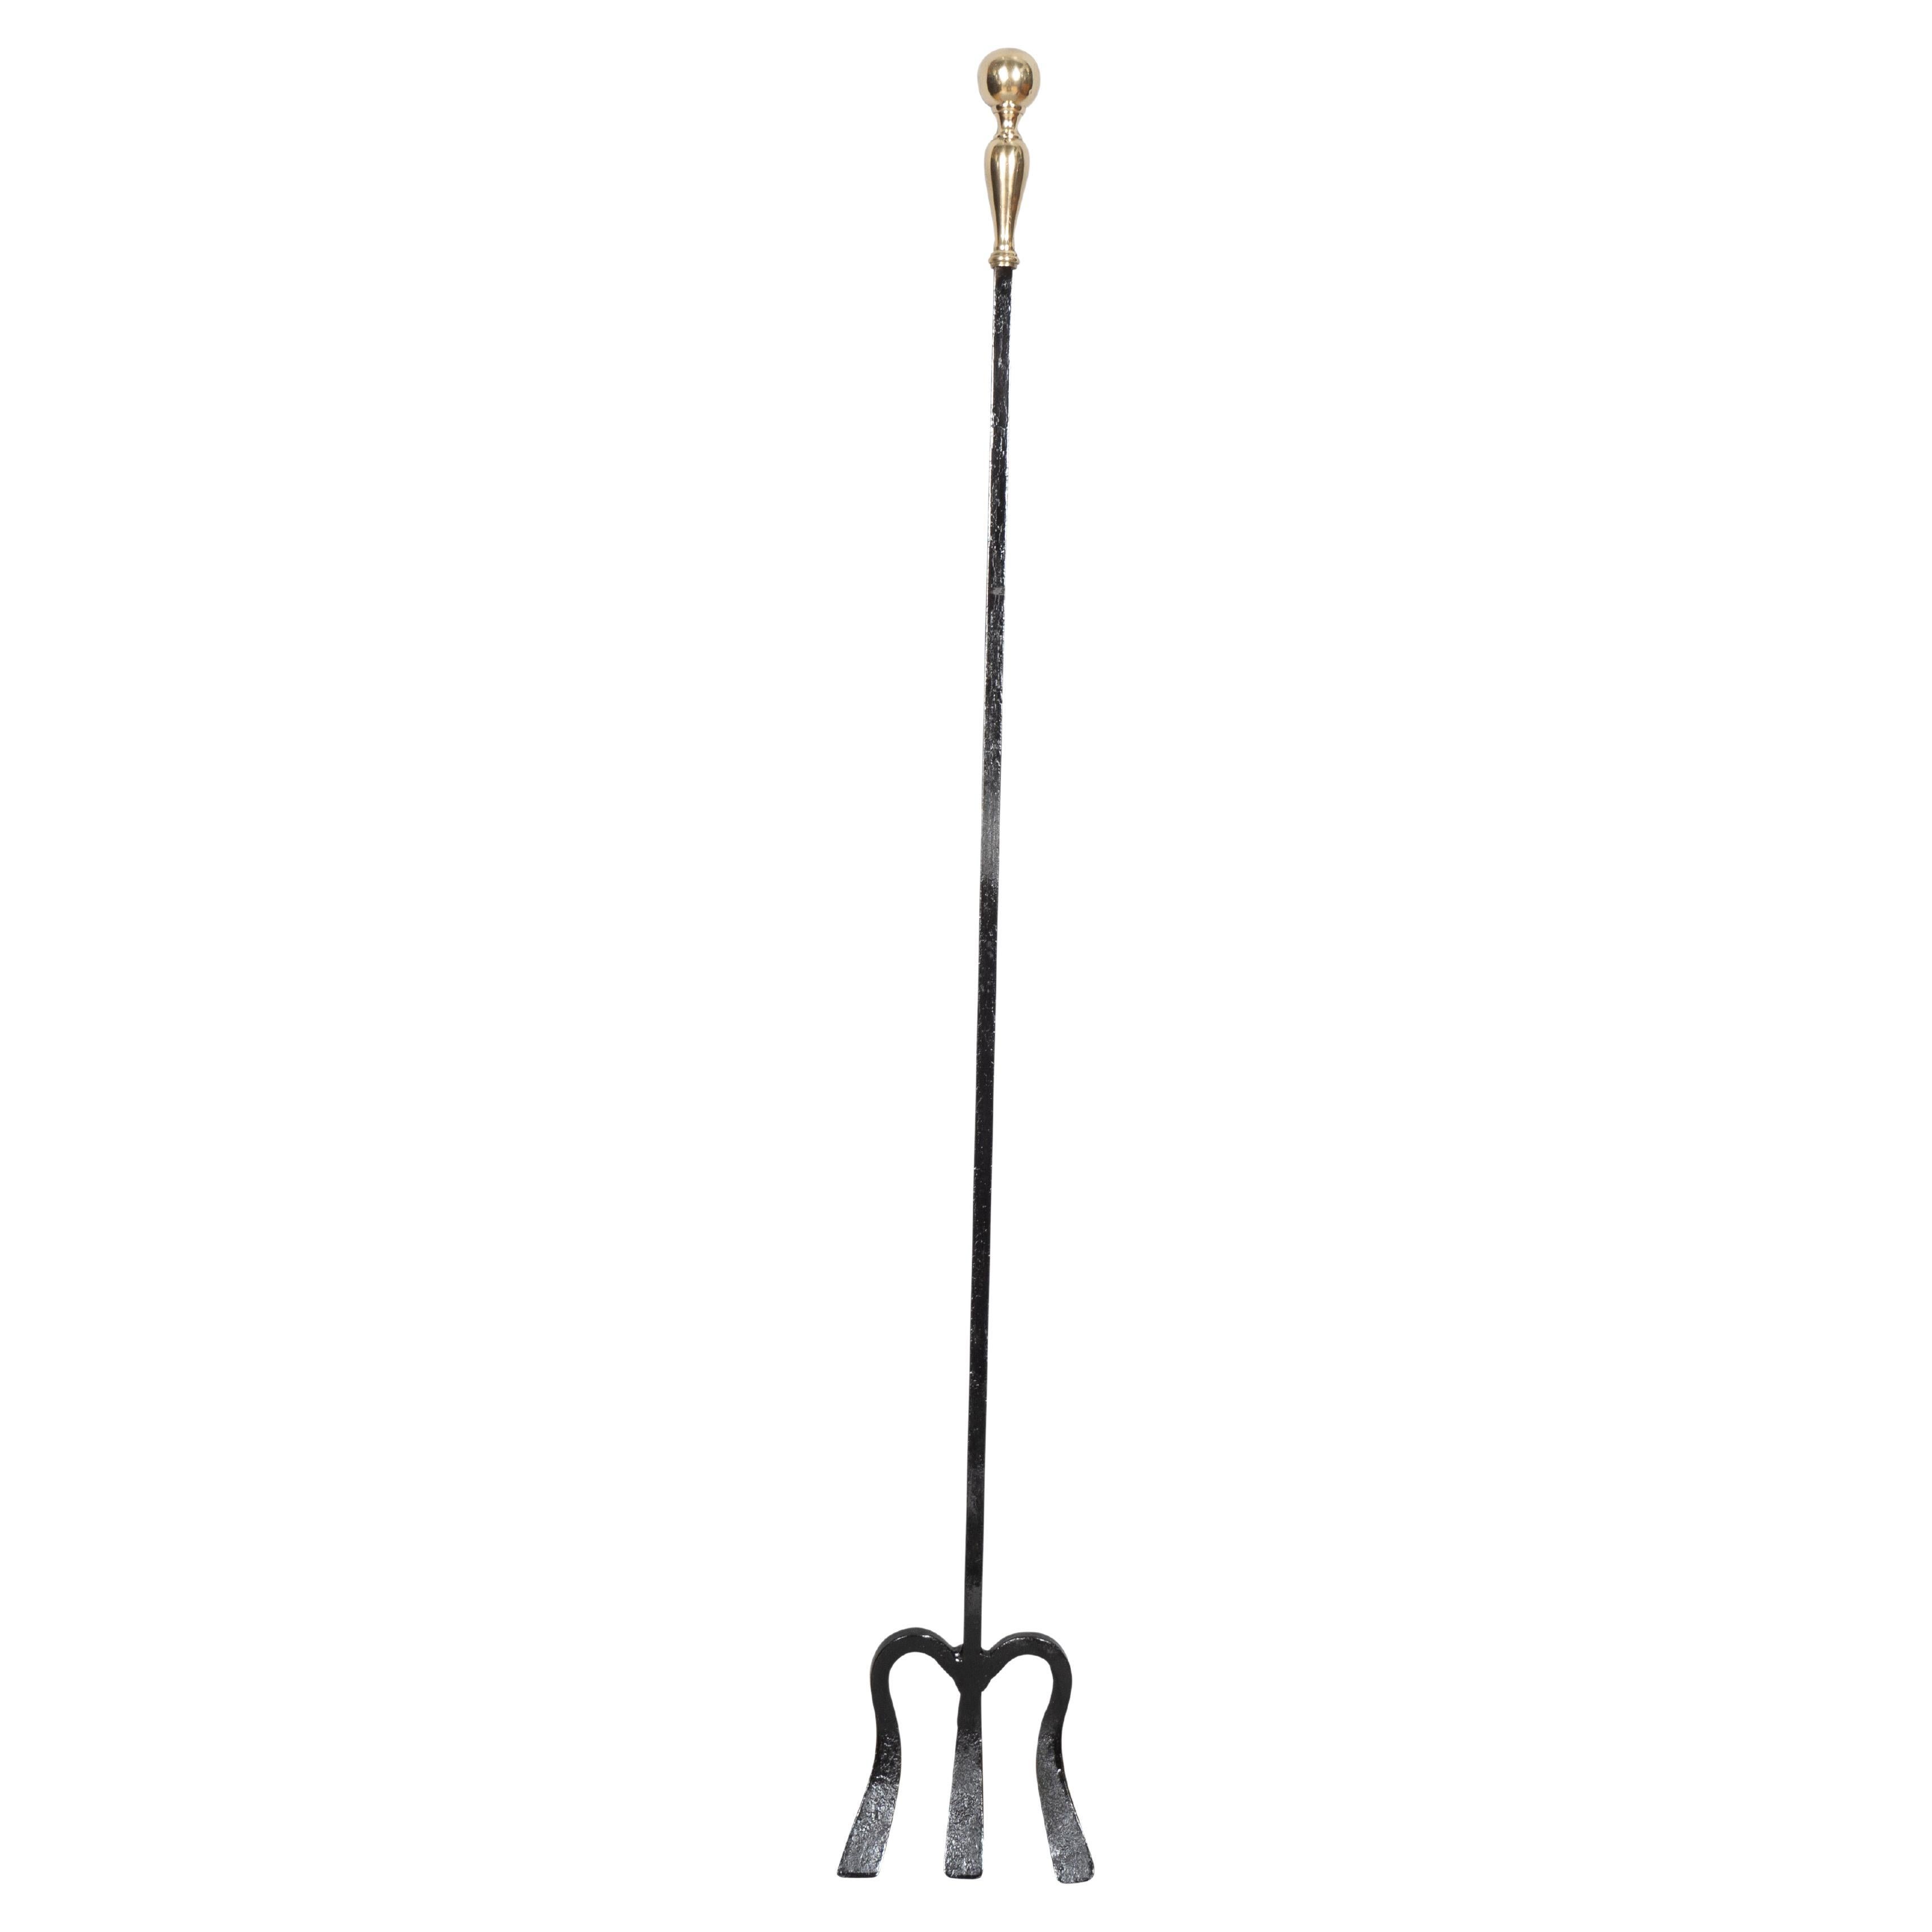 Brass and Wrought Iron Fireplace Trident